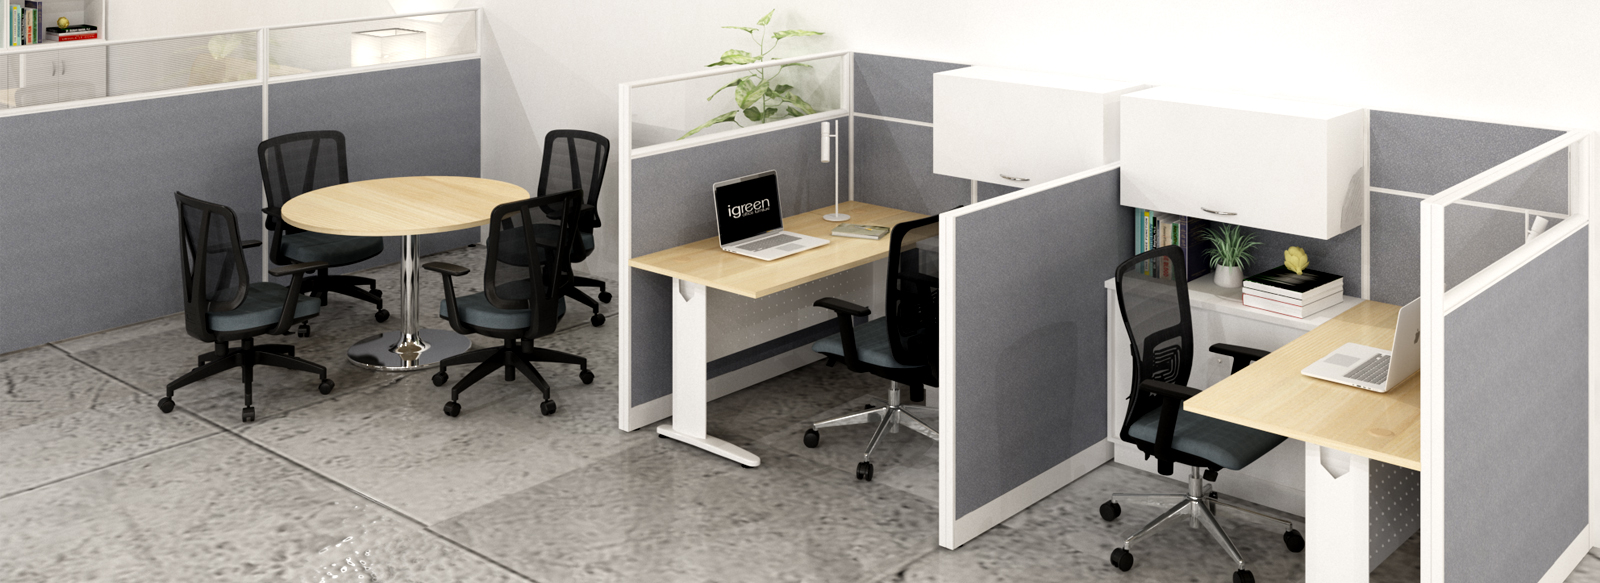 Pentagon Modern Private Workstation Divider Concept Malaysia